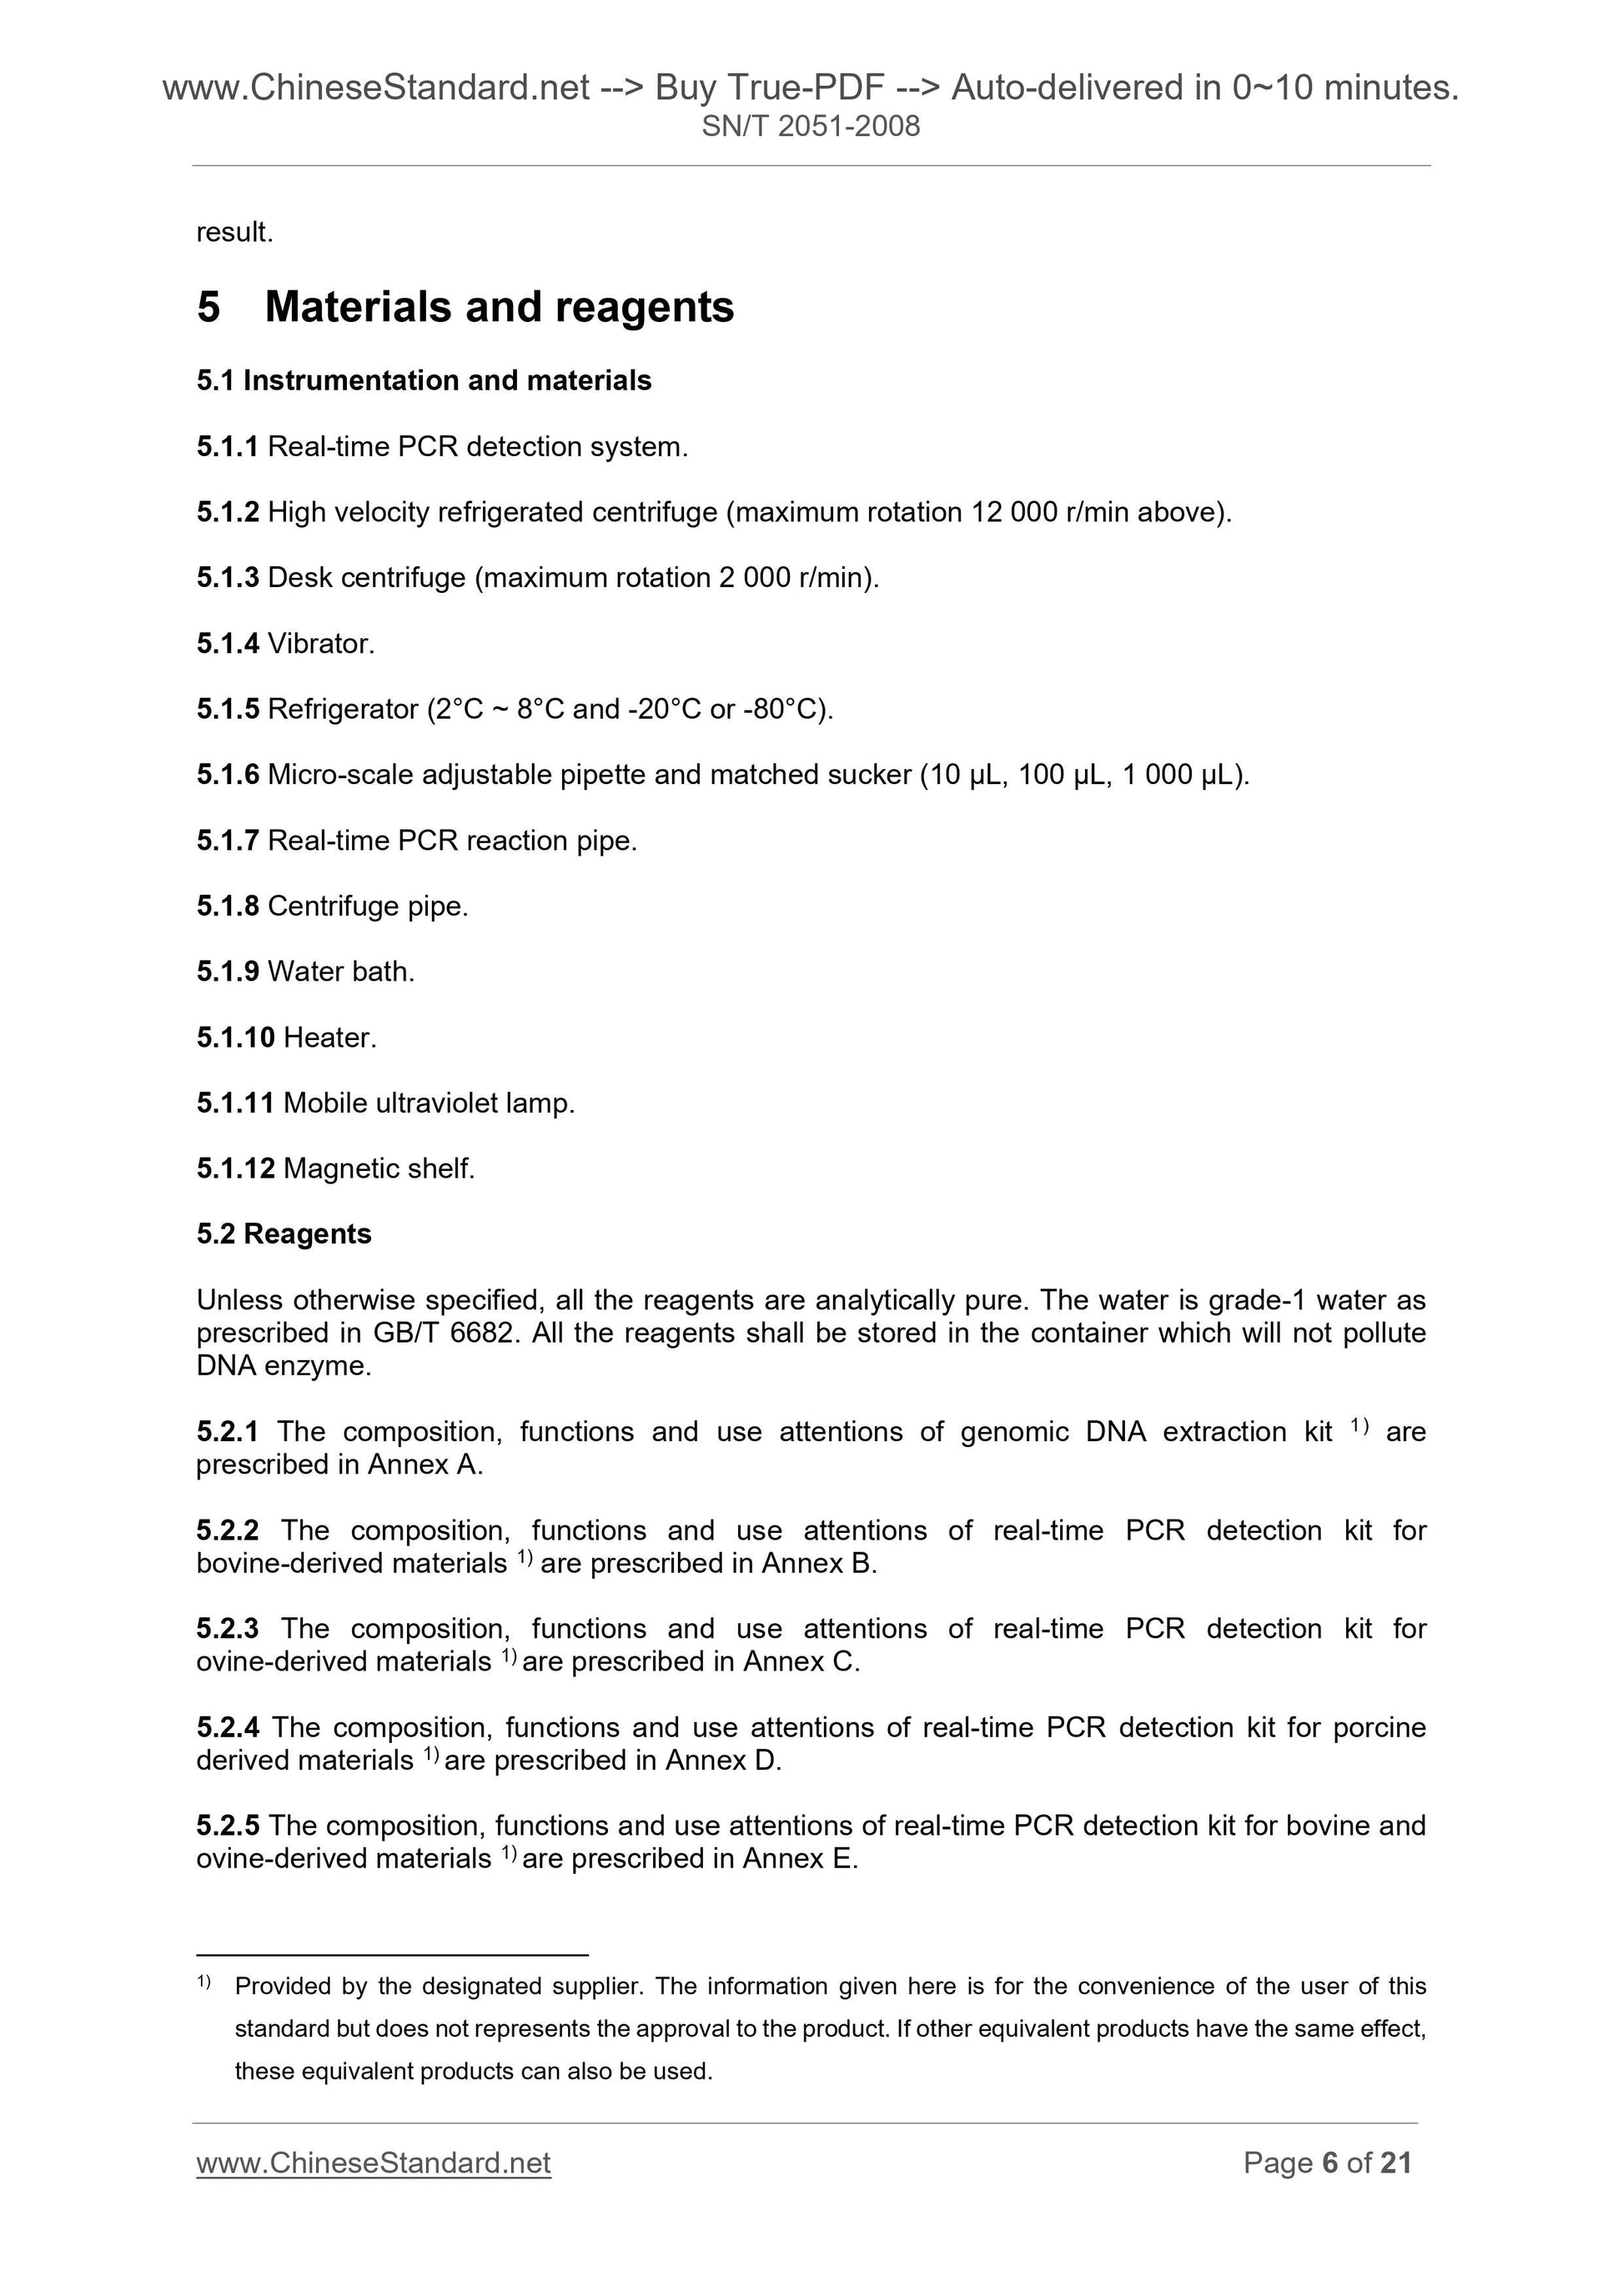 SN/T 2051-2008 Page 5